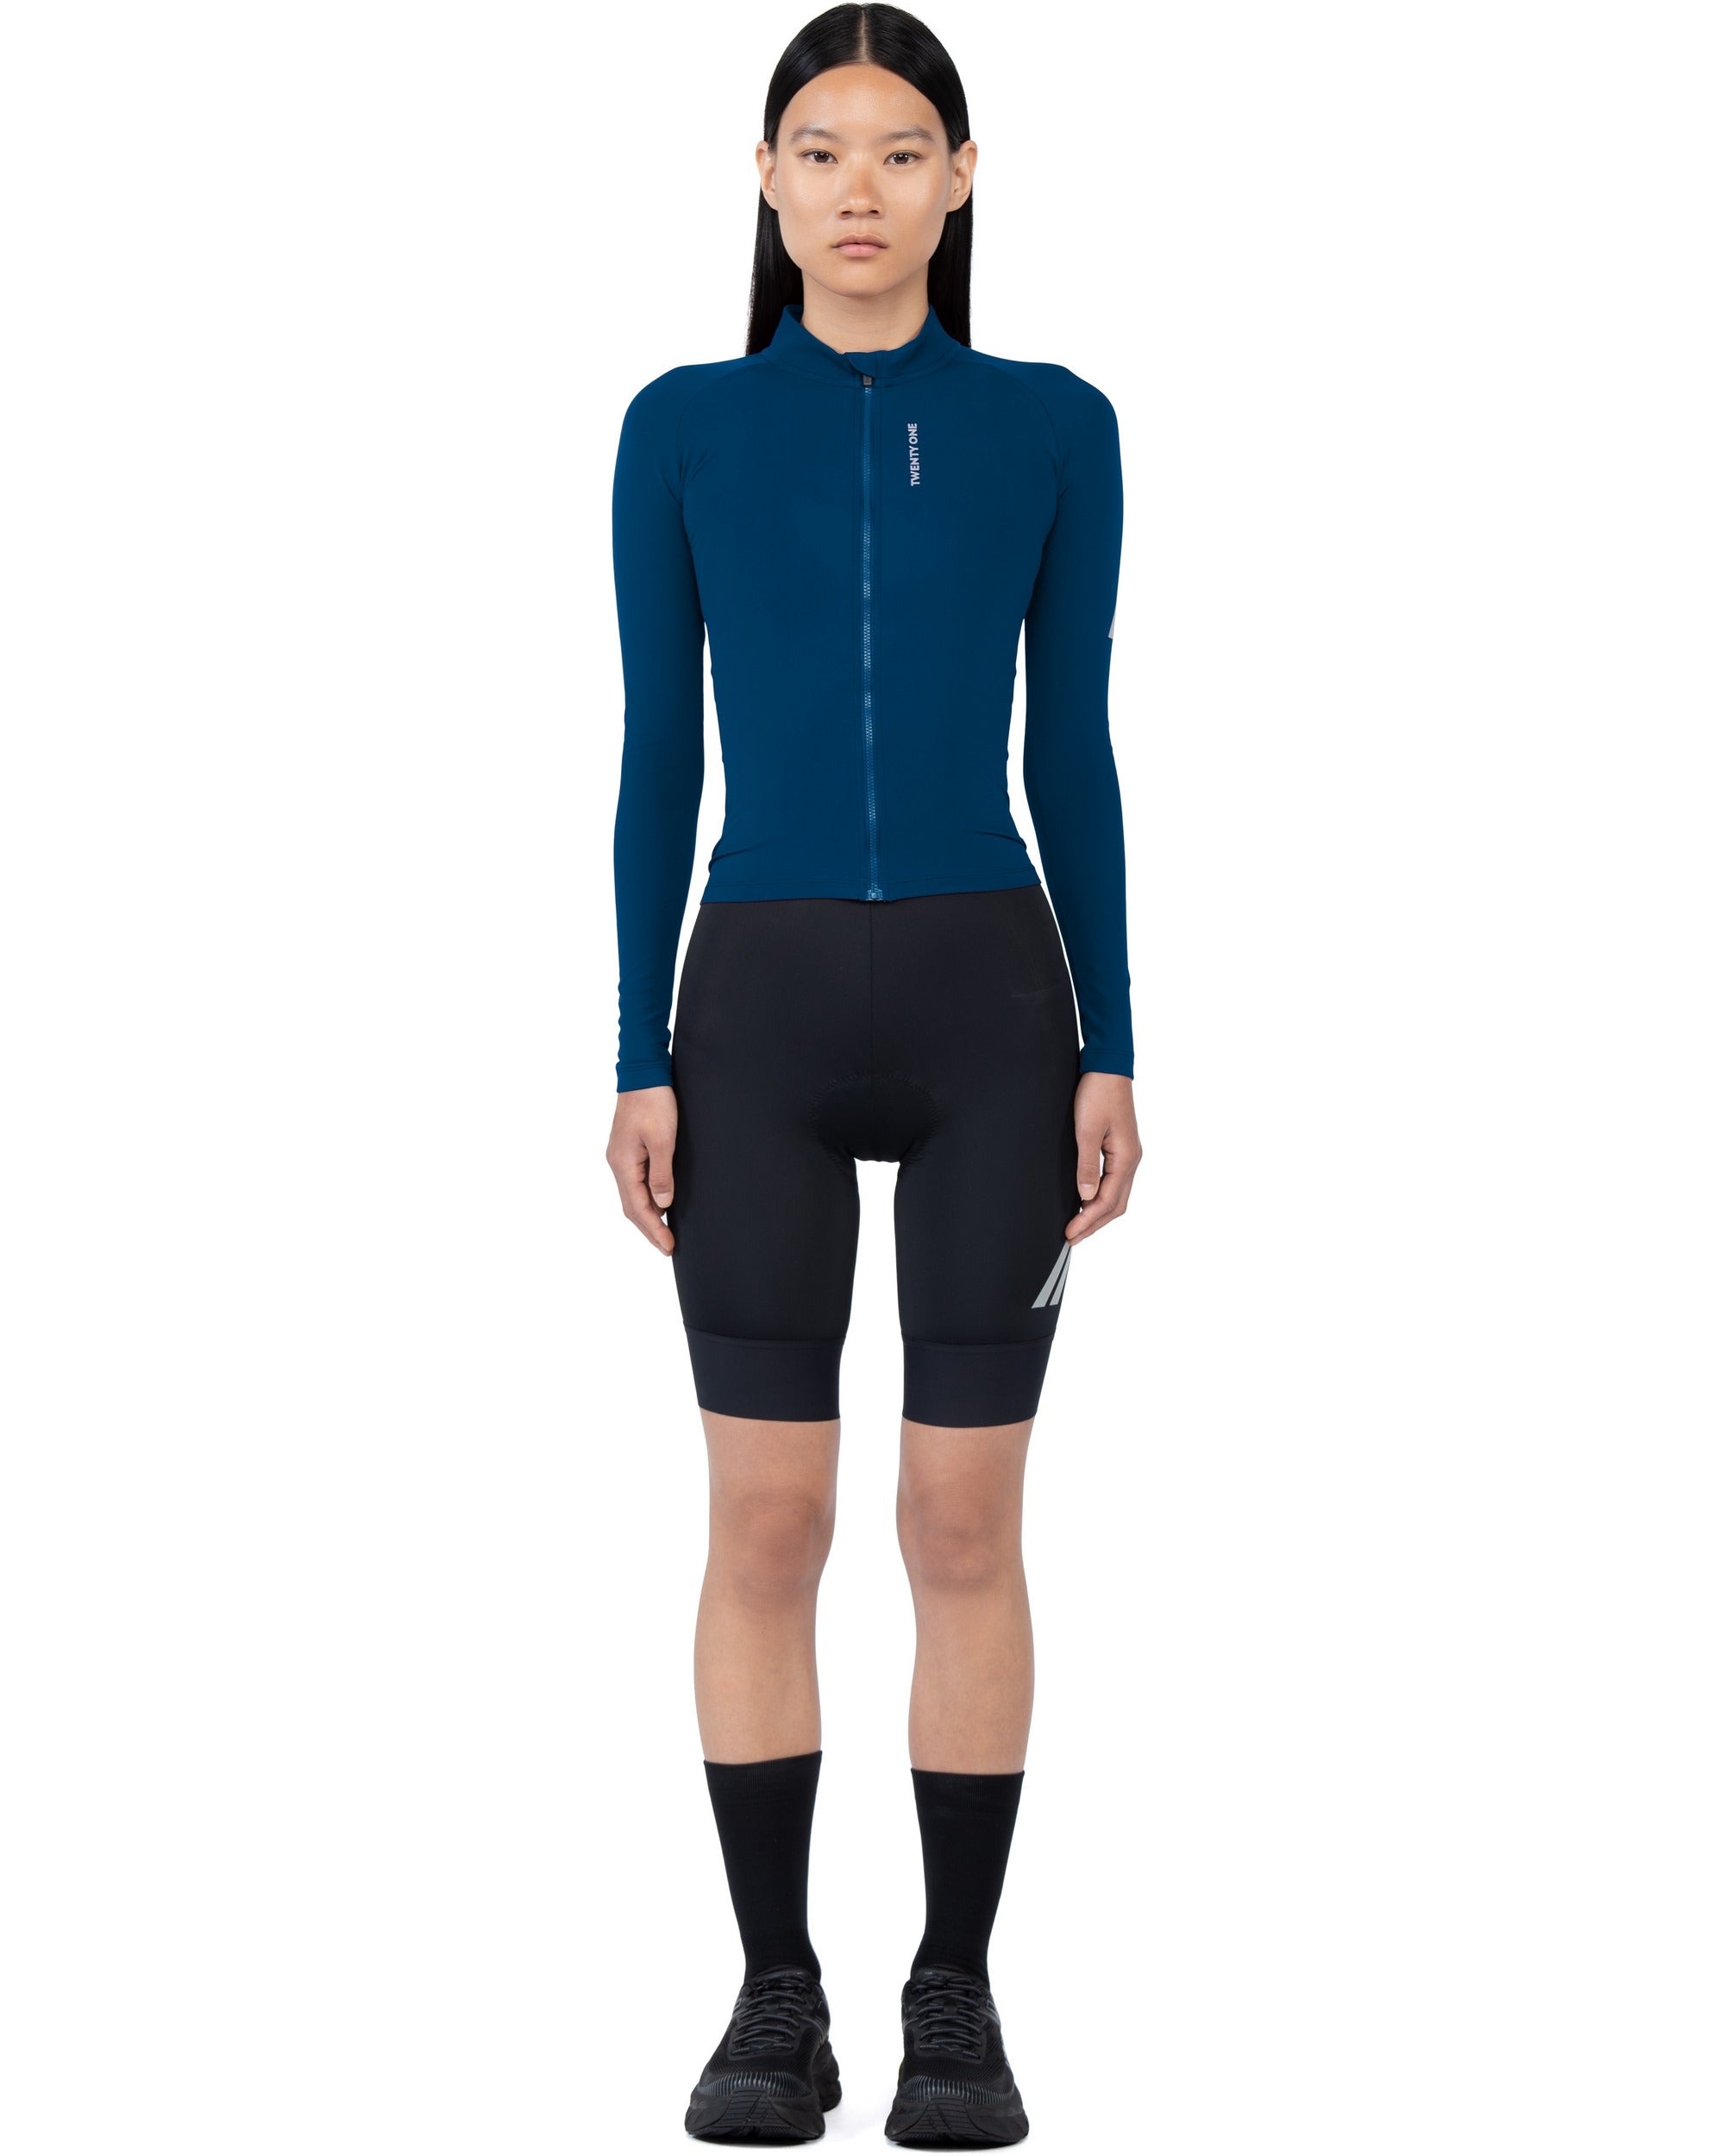 Factory Thermal Long Sleeve Jersey 2.0